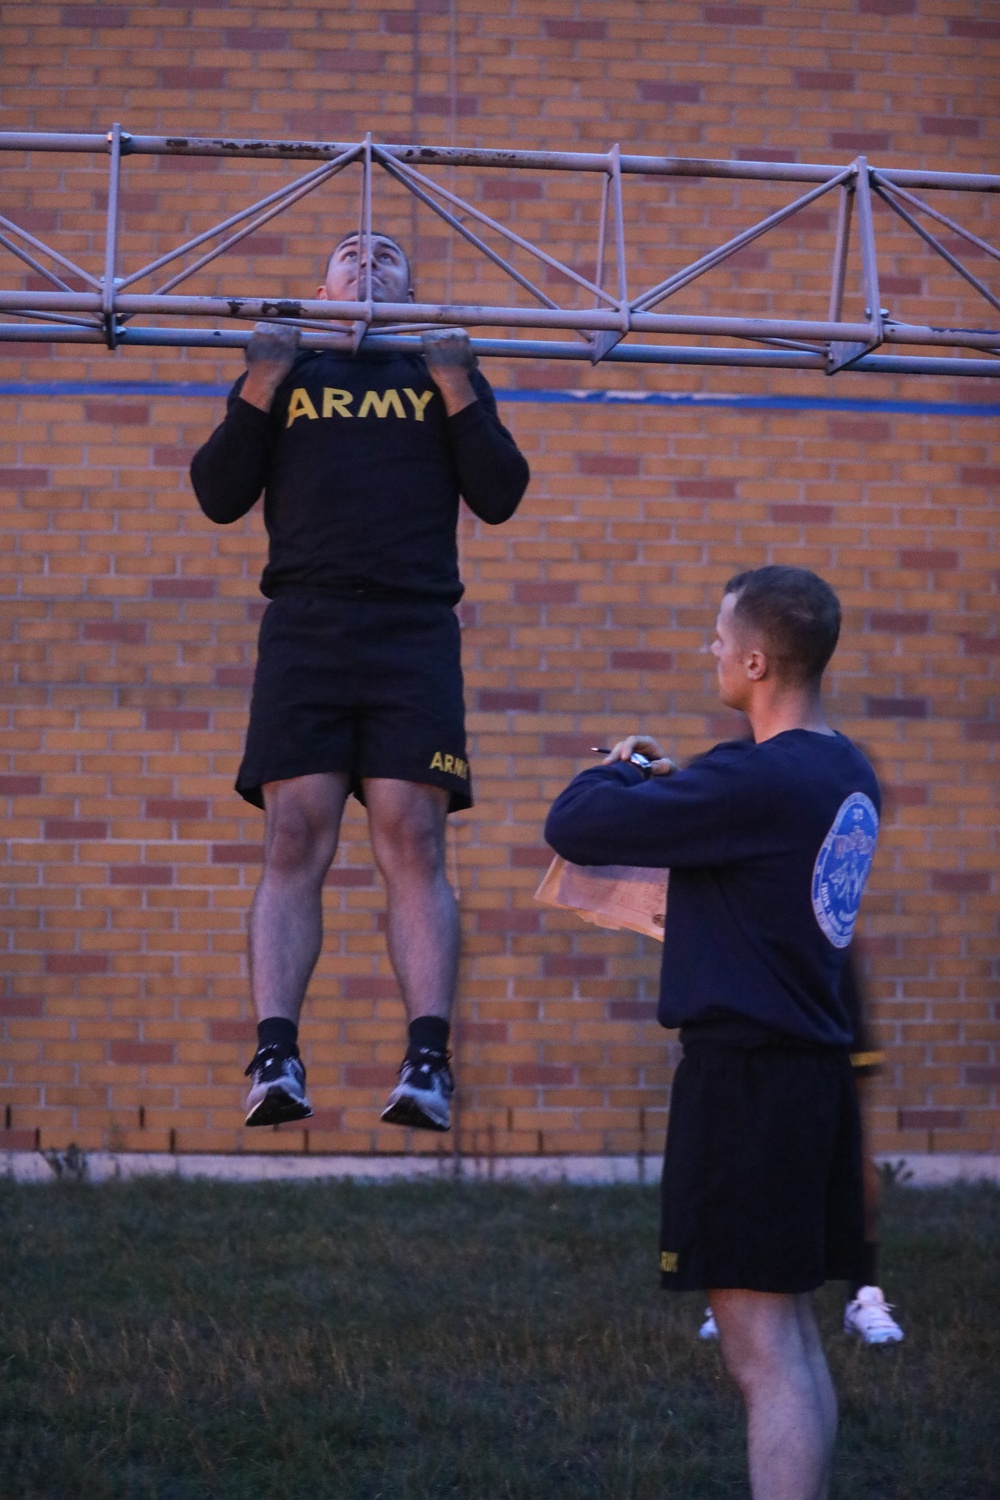 German Armed Forces Proficiency Badge fitness test